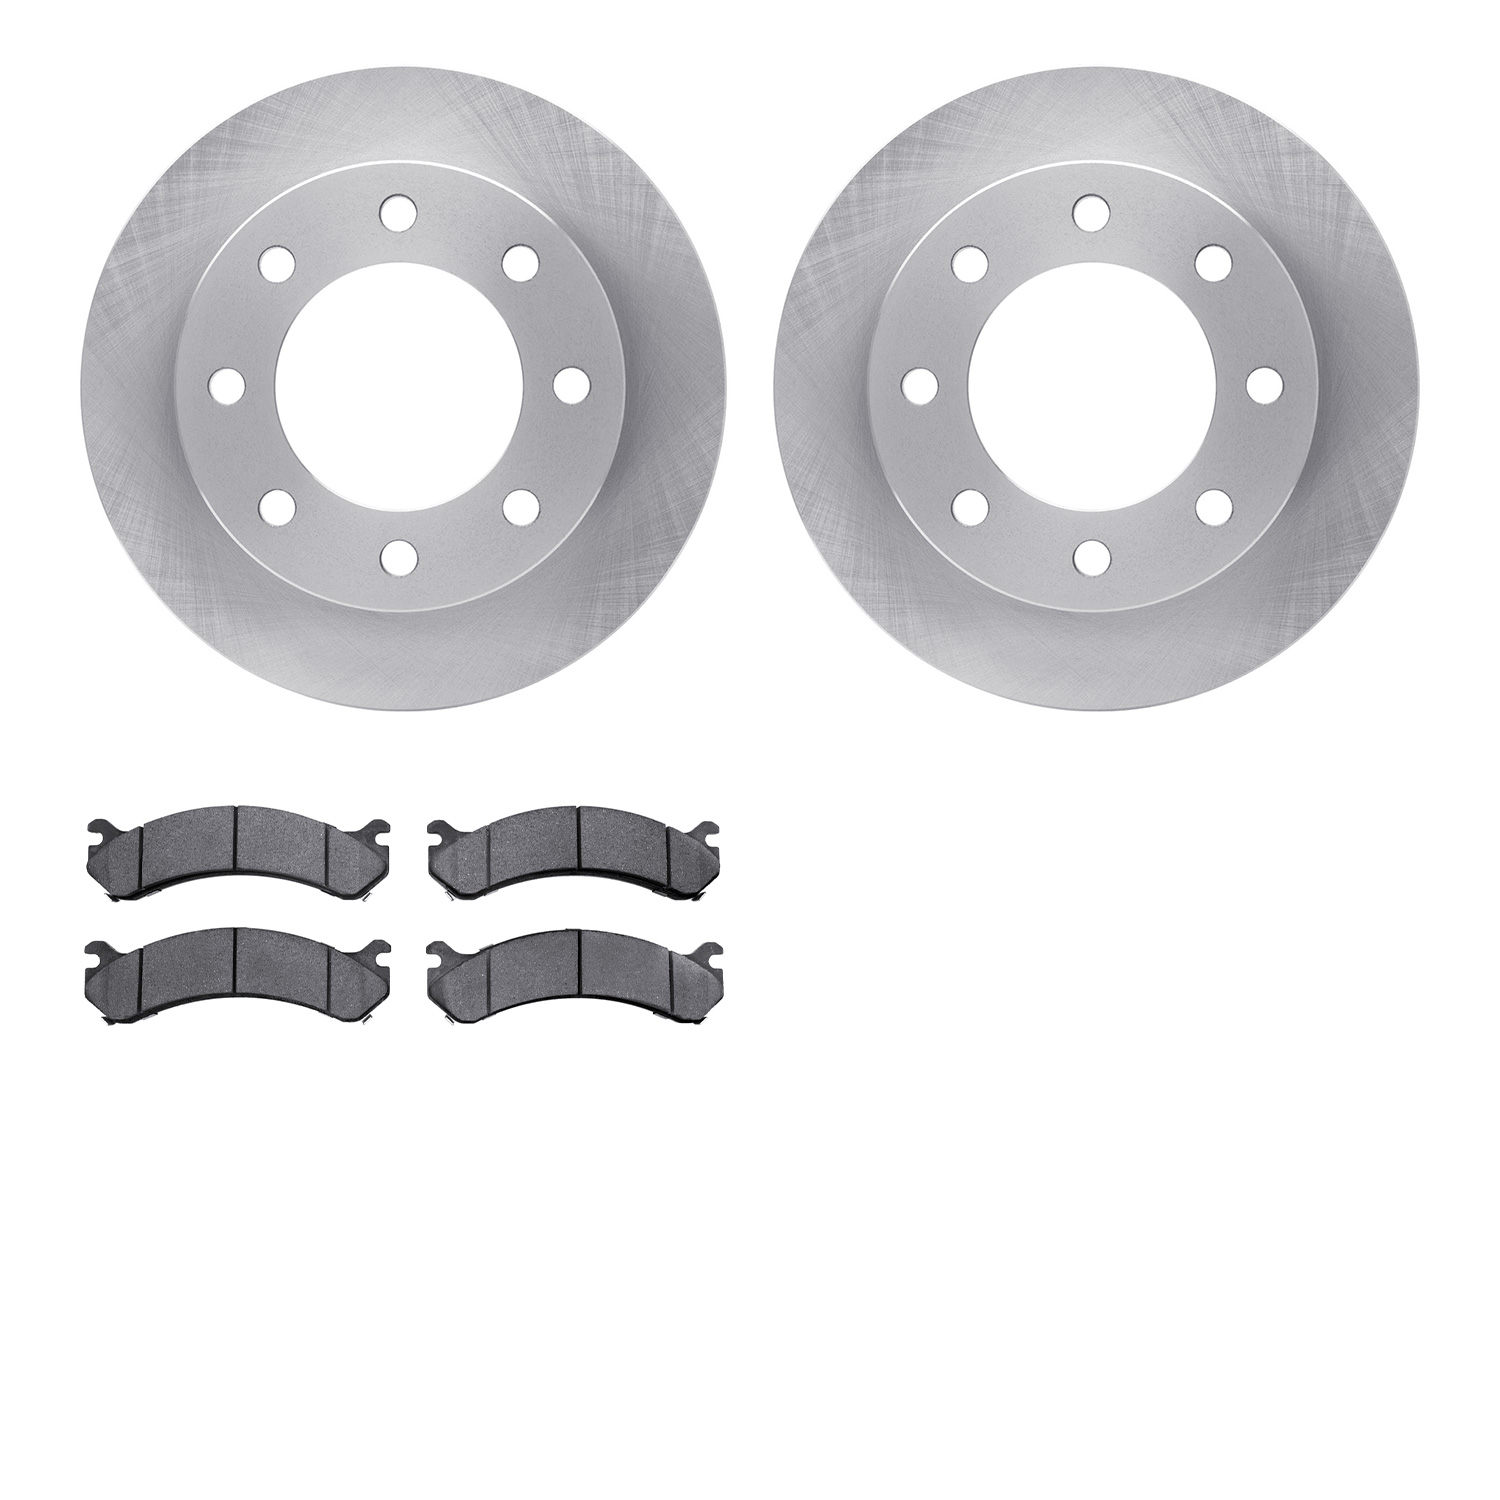 6402-48070 Brake Rotors with Ultimate-Duty Brake Pads, 1999-2020 GM, Position: Front